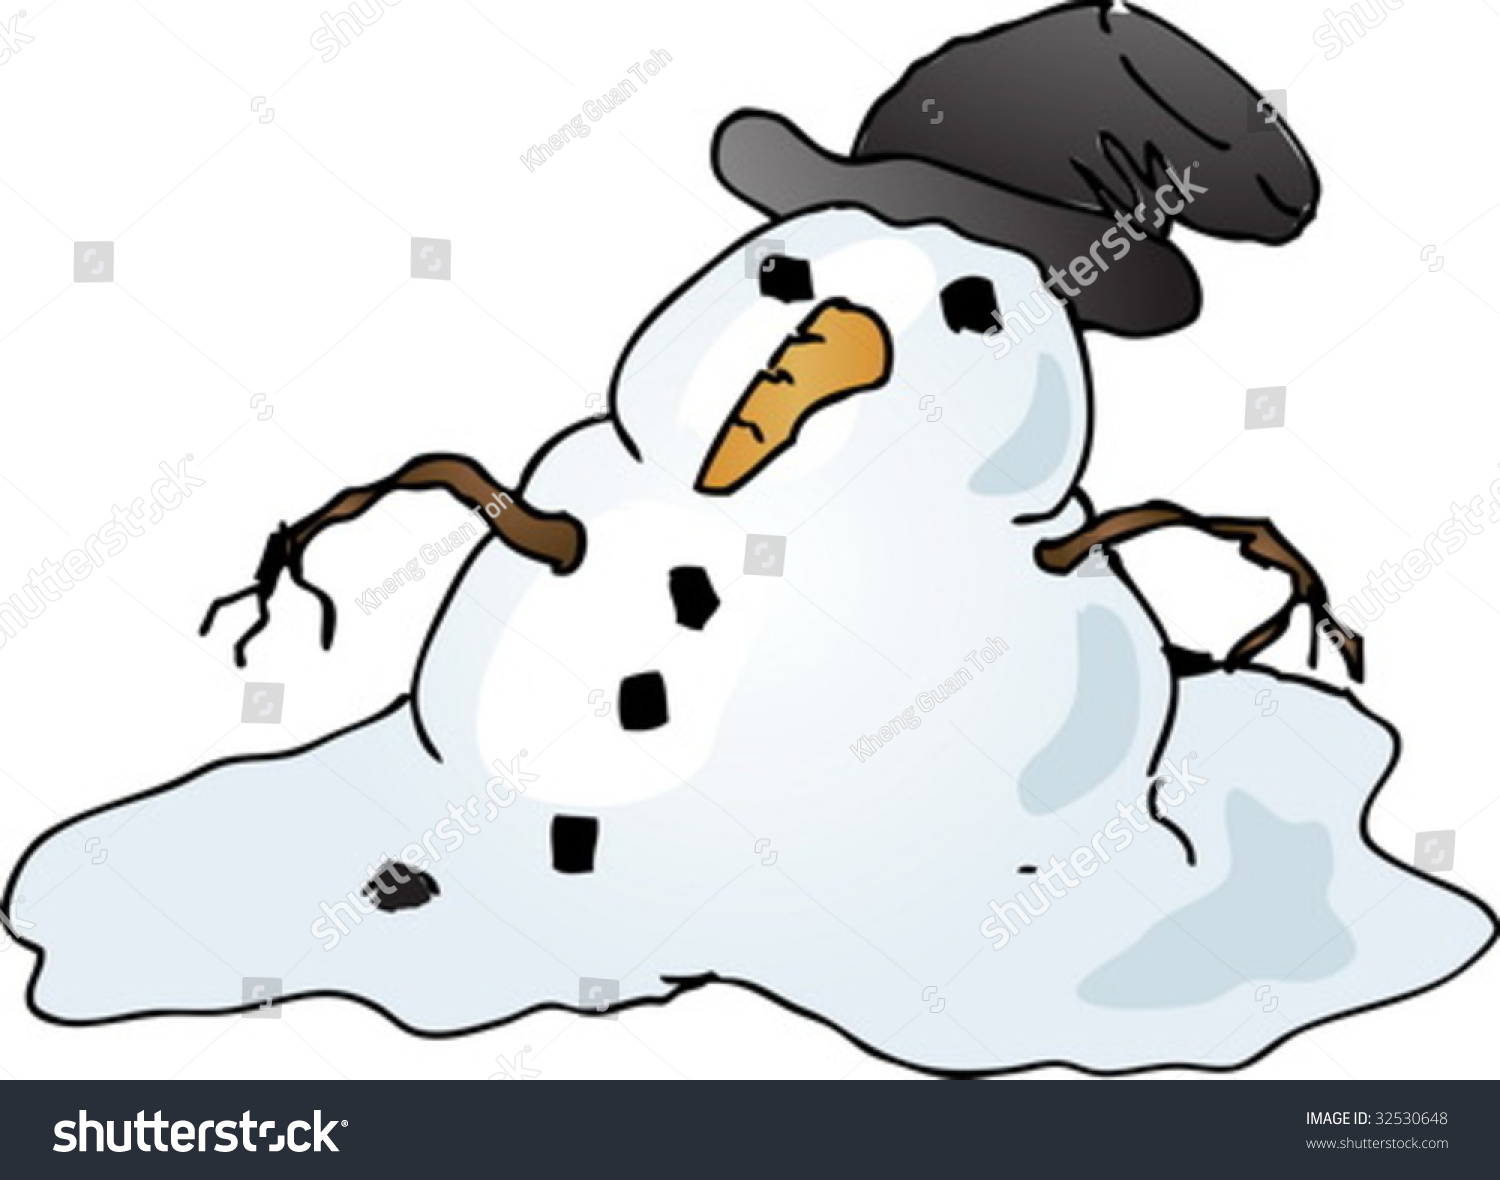 Melting Depressed Snowman With Tophat, Cartoon Comic Illustration ...